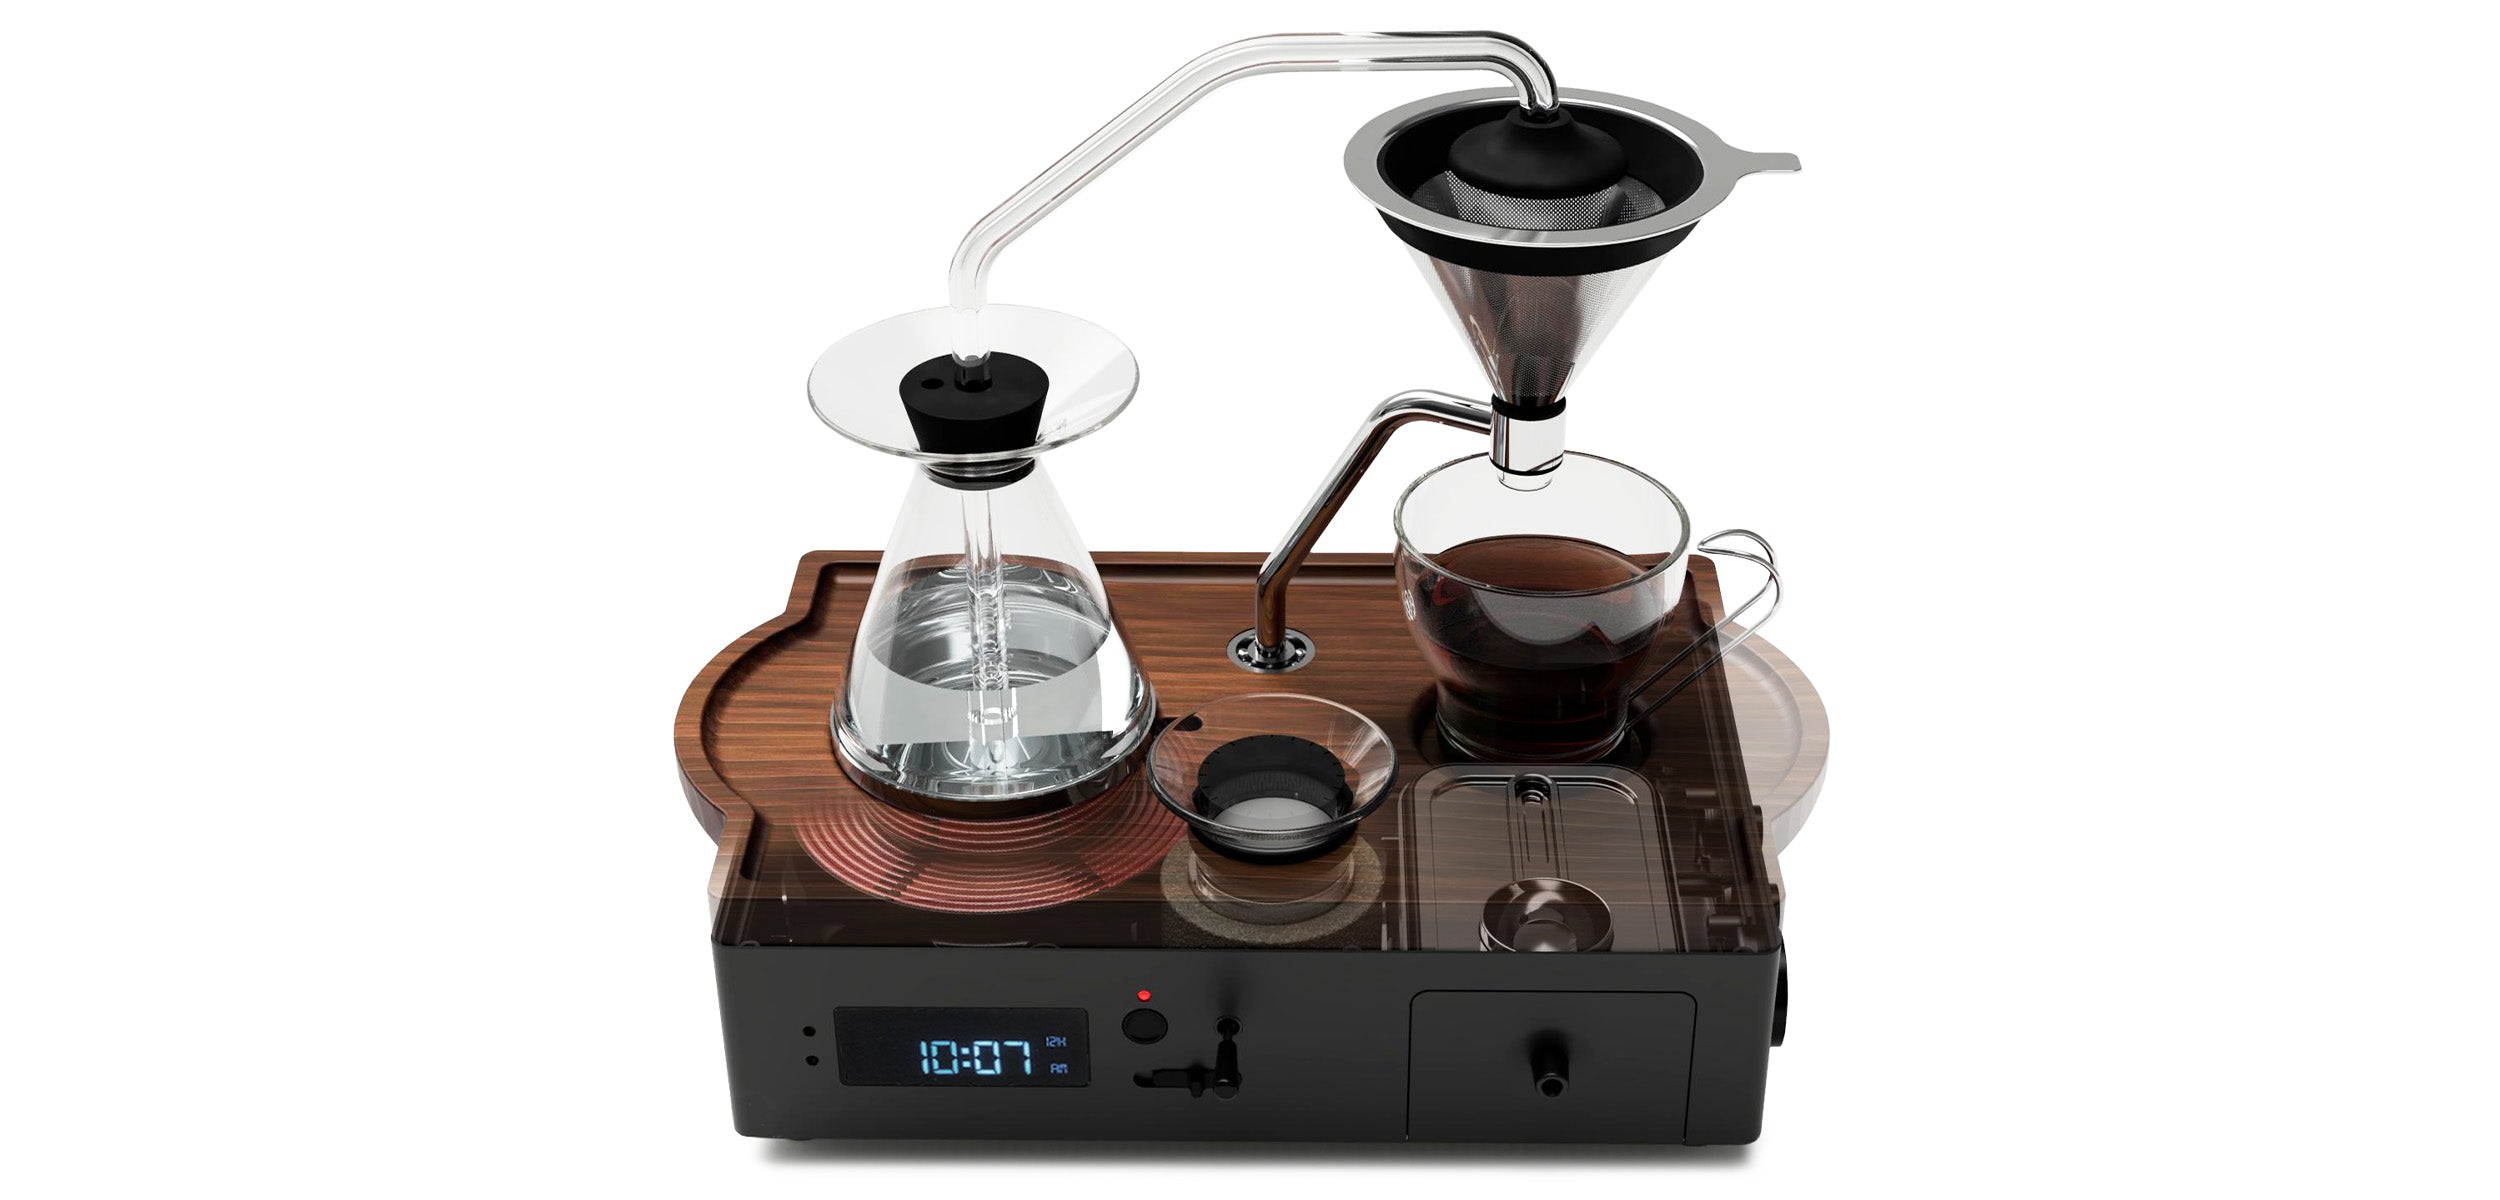 Customers are praising this alarm clock coffee machine - but it has an  expensive price tag